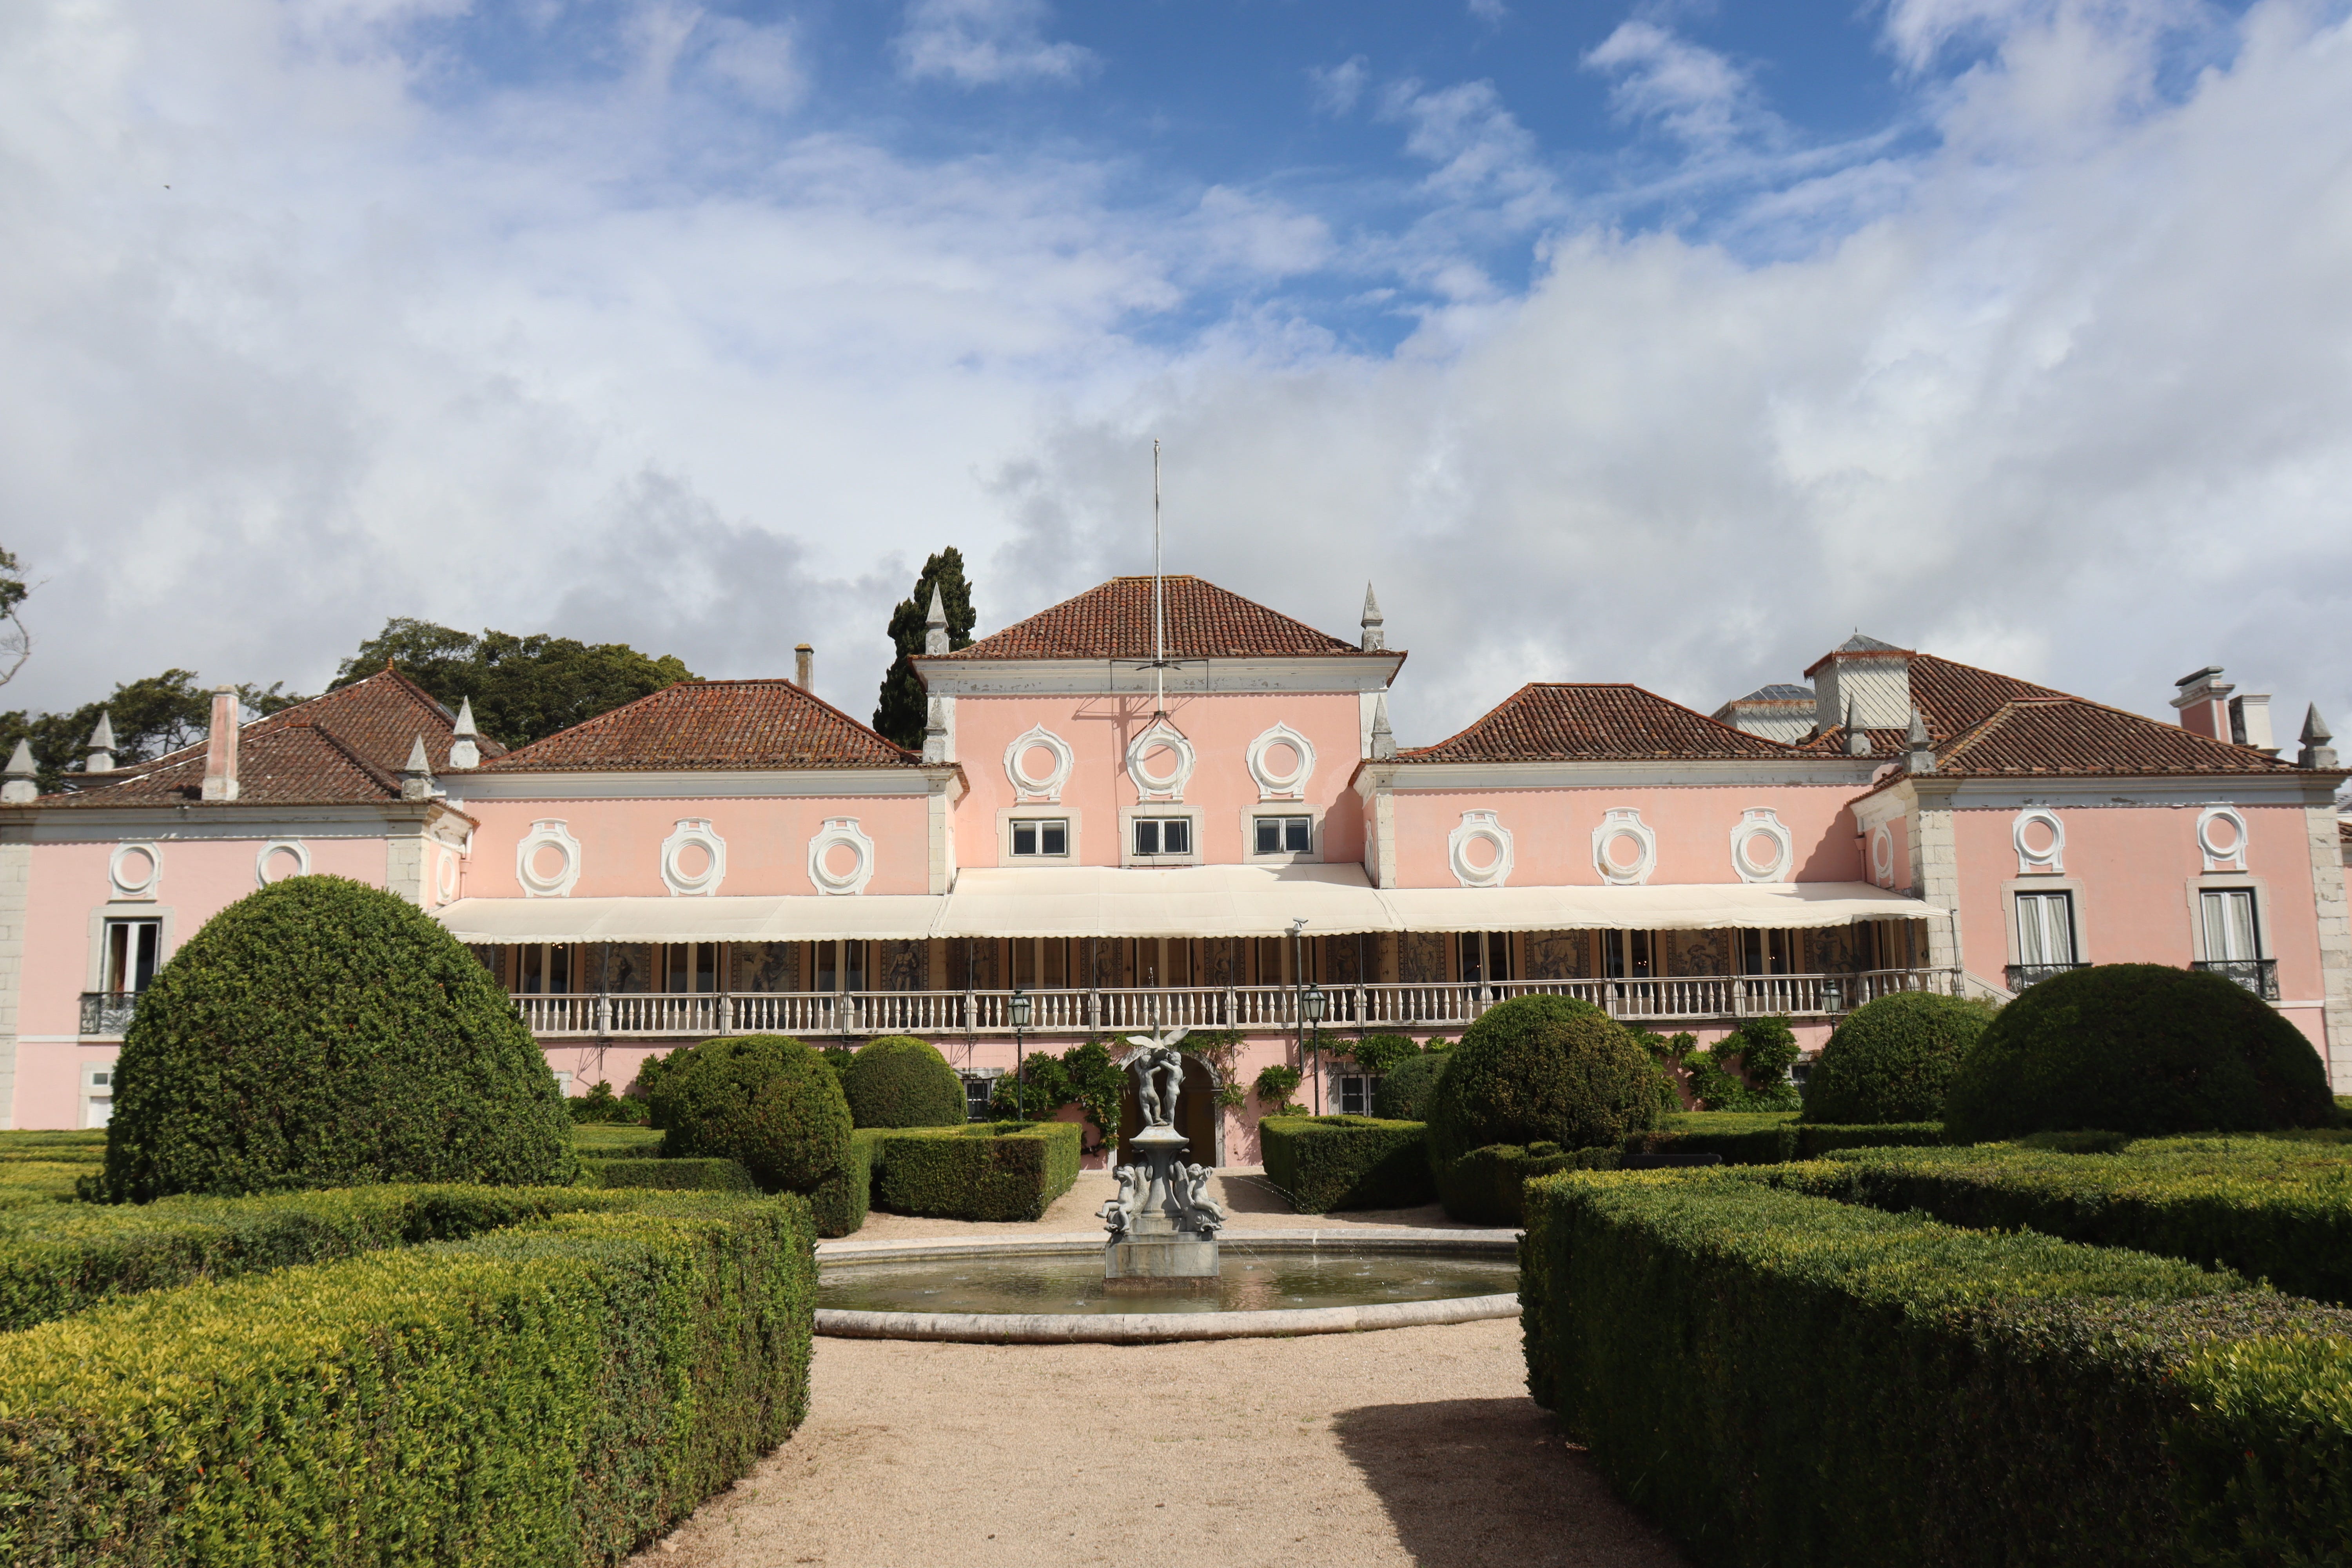 Belem Palace Gardens is one of the very best things to do in Lisbon